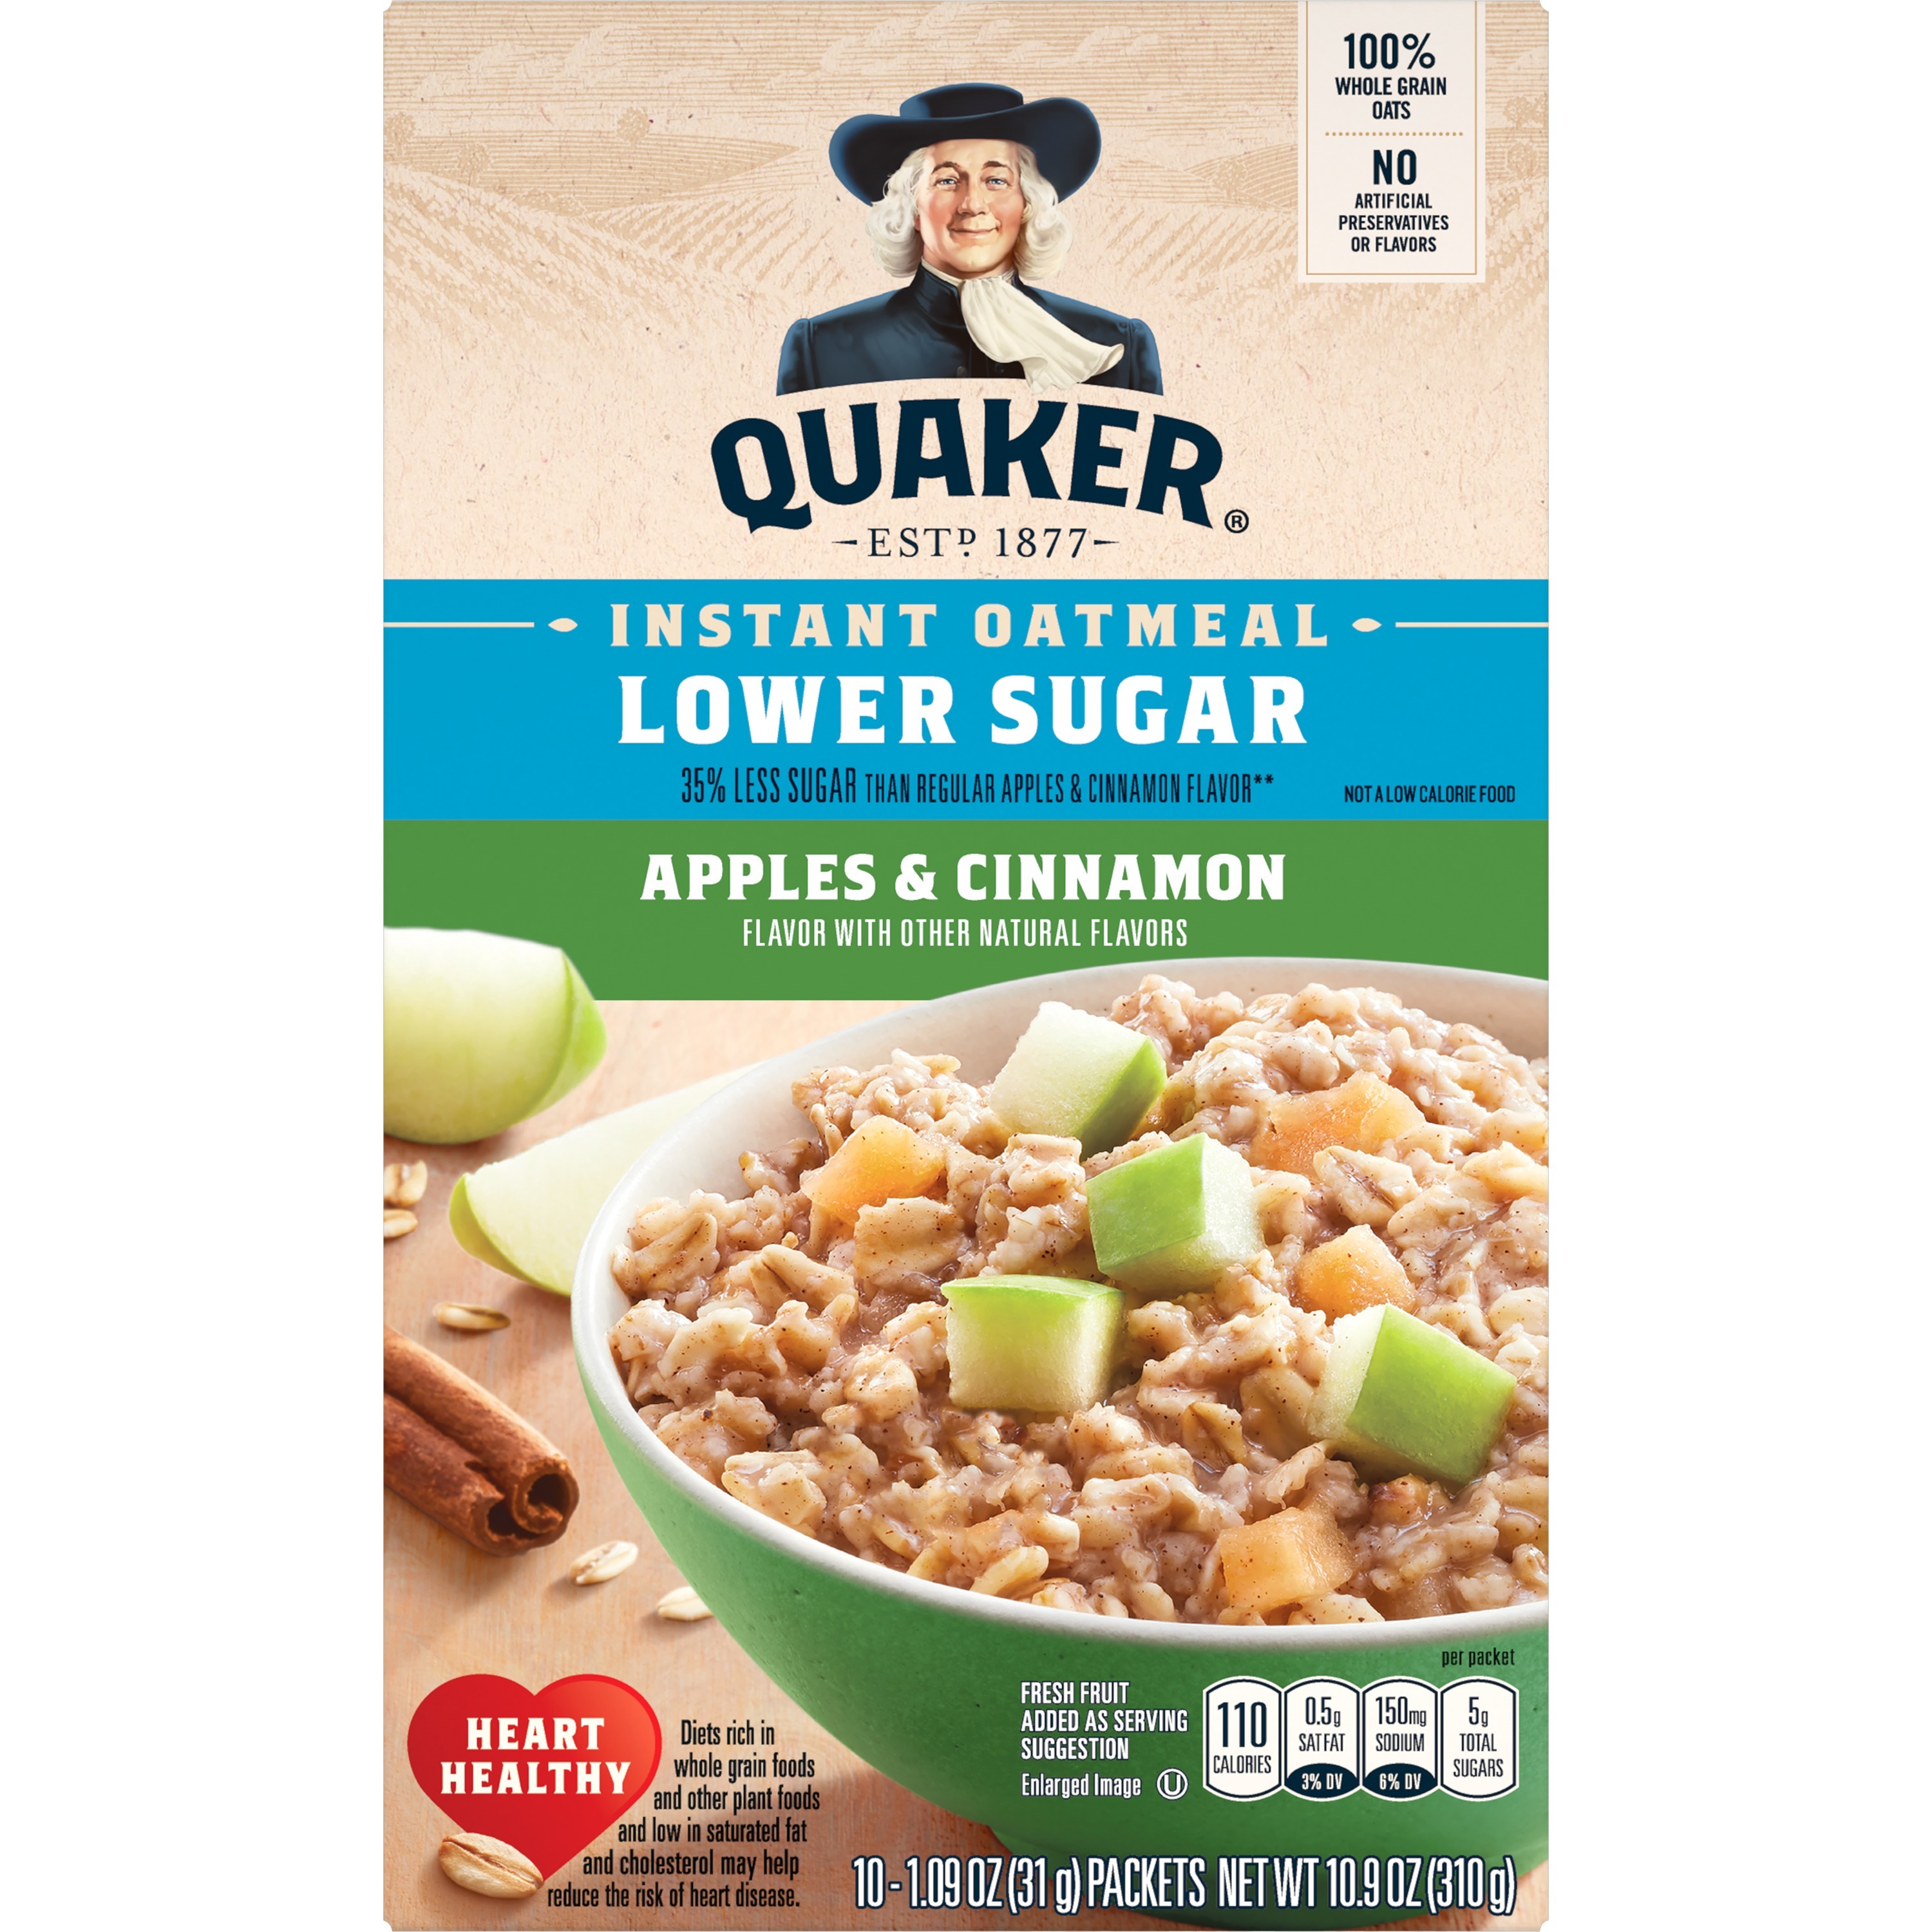 Quaker, Lower Sugar, Instant Oatmeal, Variety Pack - SmartLabel™